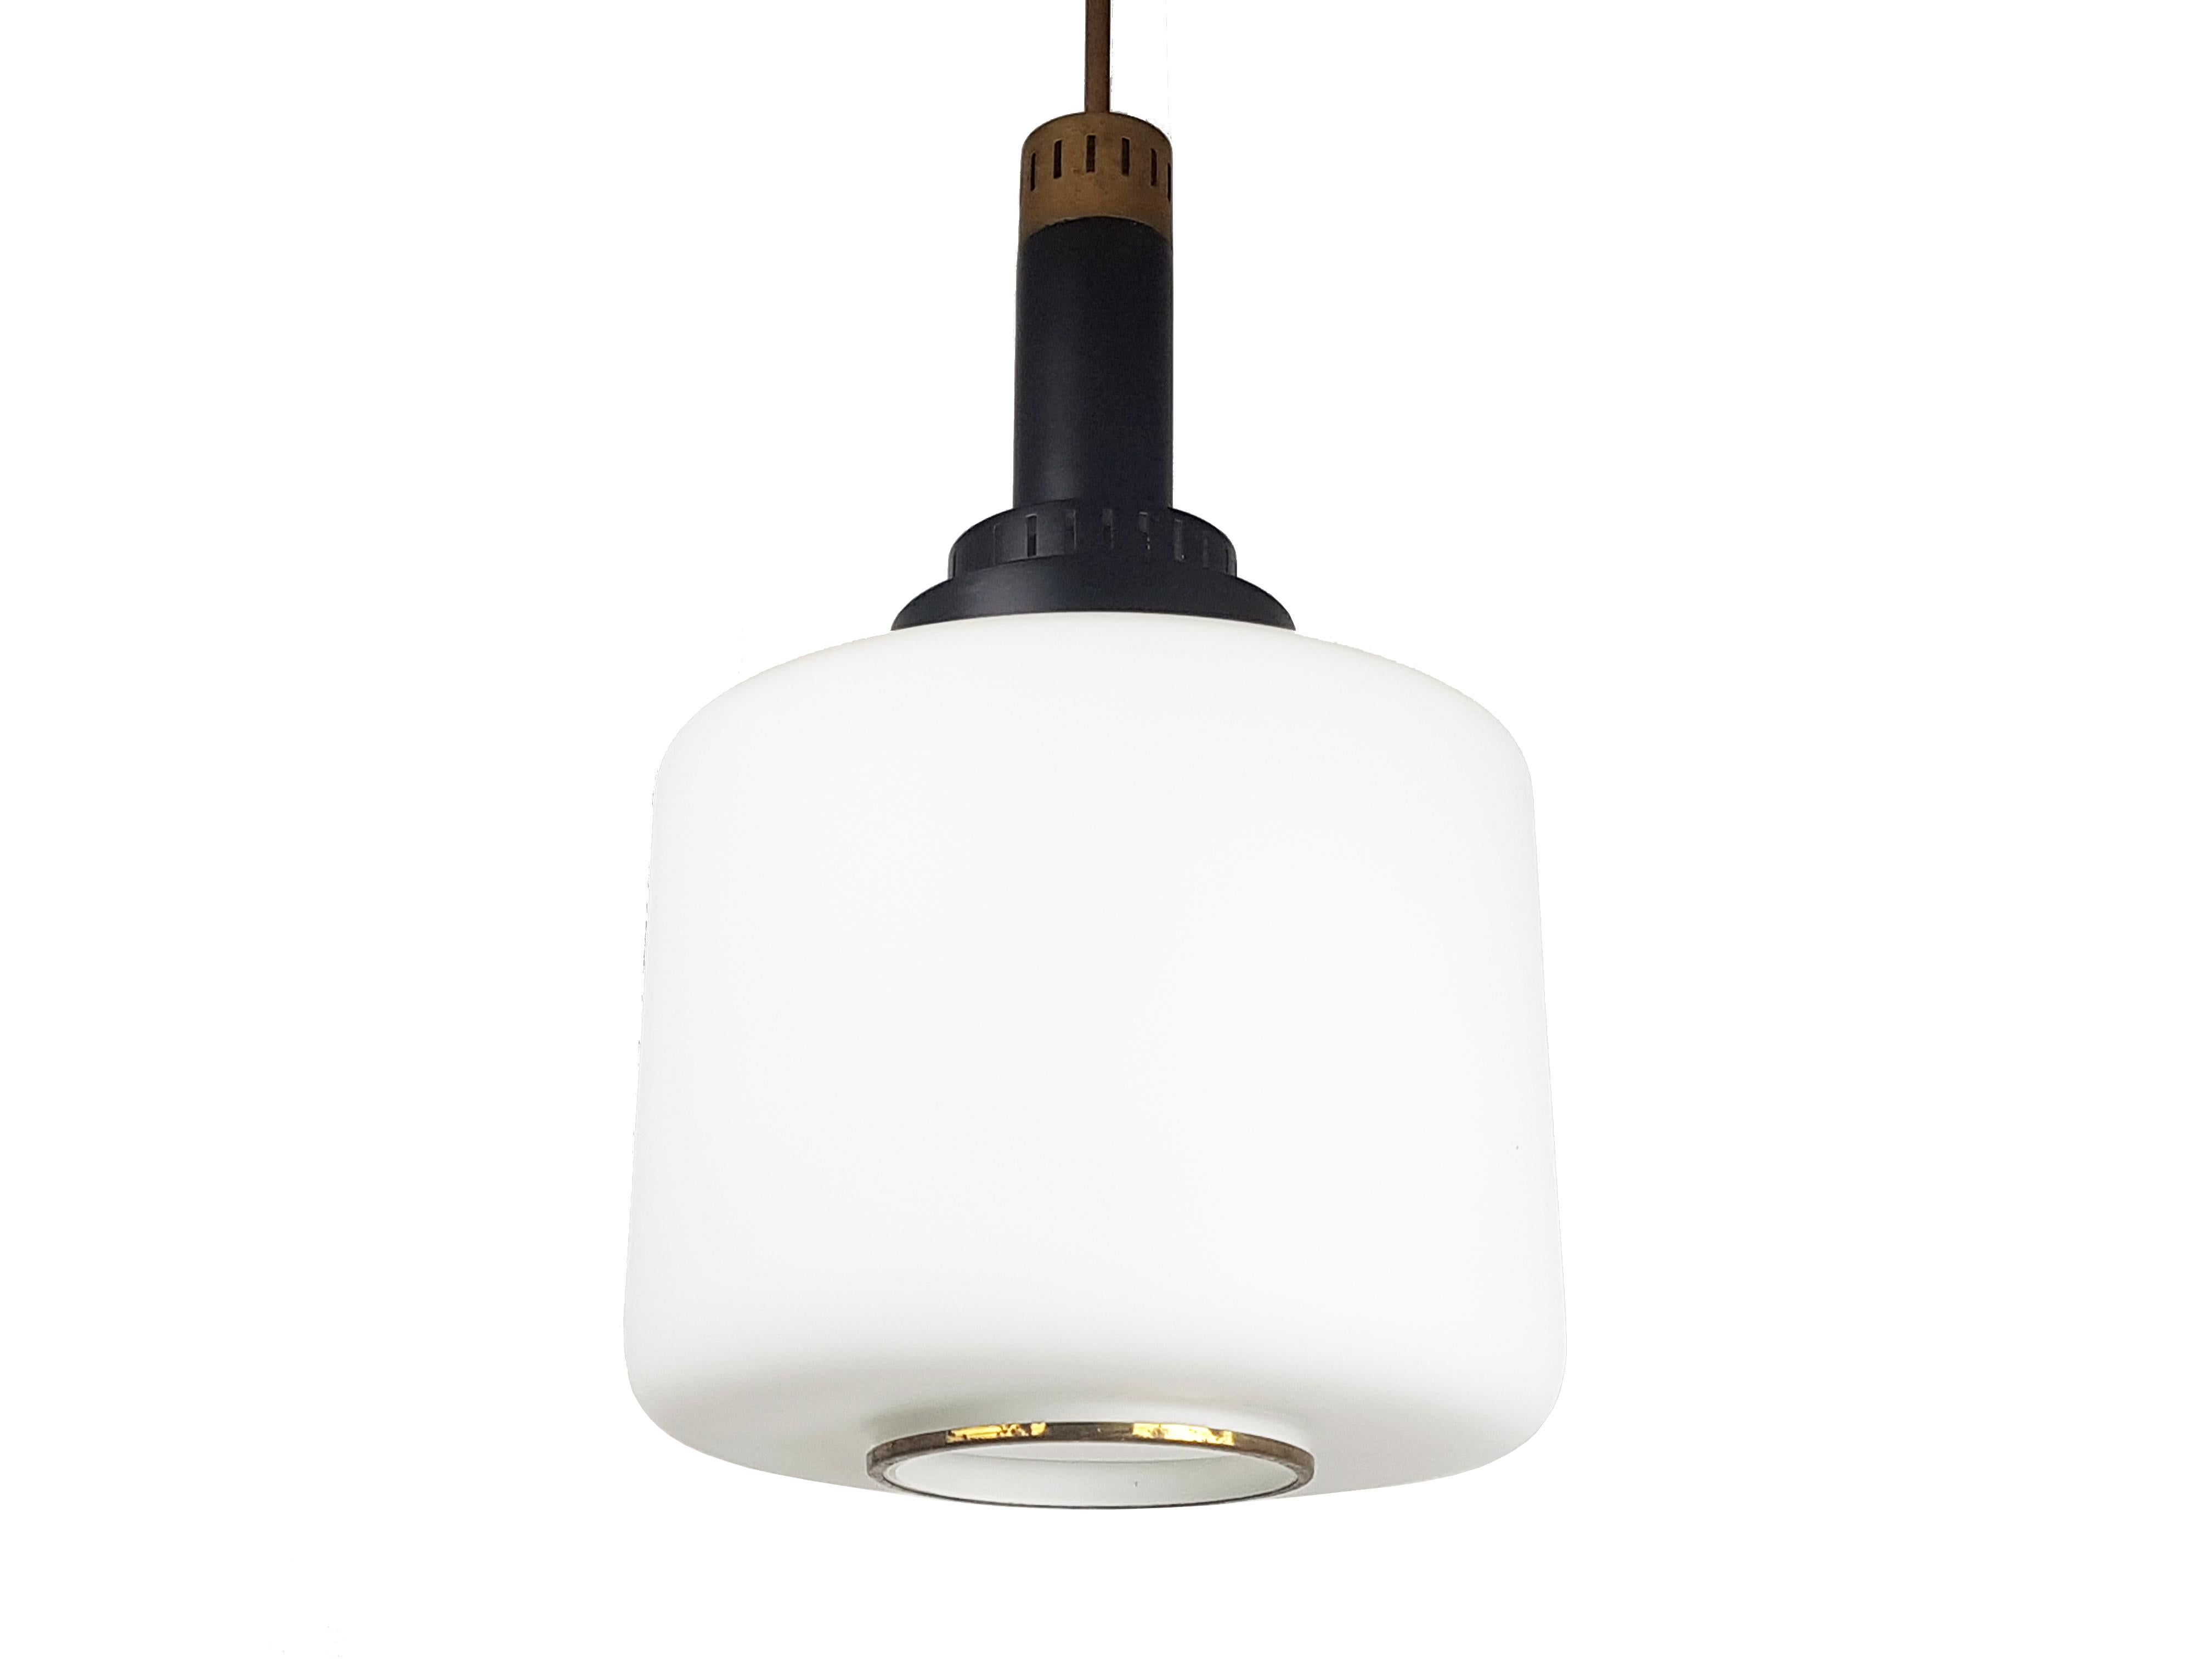 This pendant was produced in Italy between the '50s and the '60s.
It was made by a black painted aluminum body with brass rod and details and a sandblasted cylindrical glass shade.